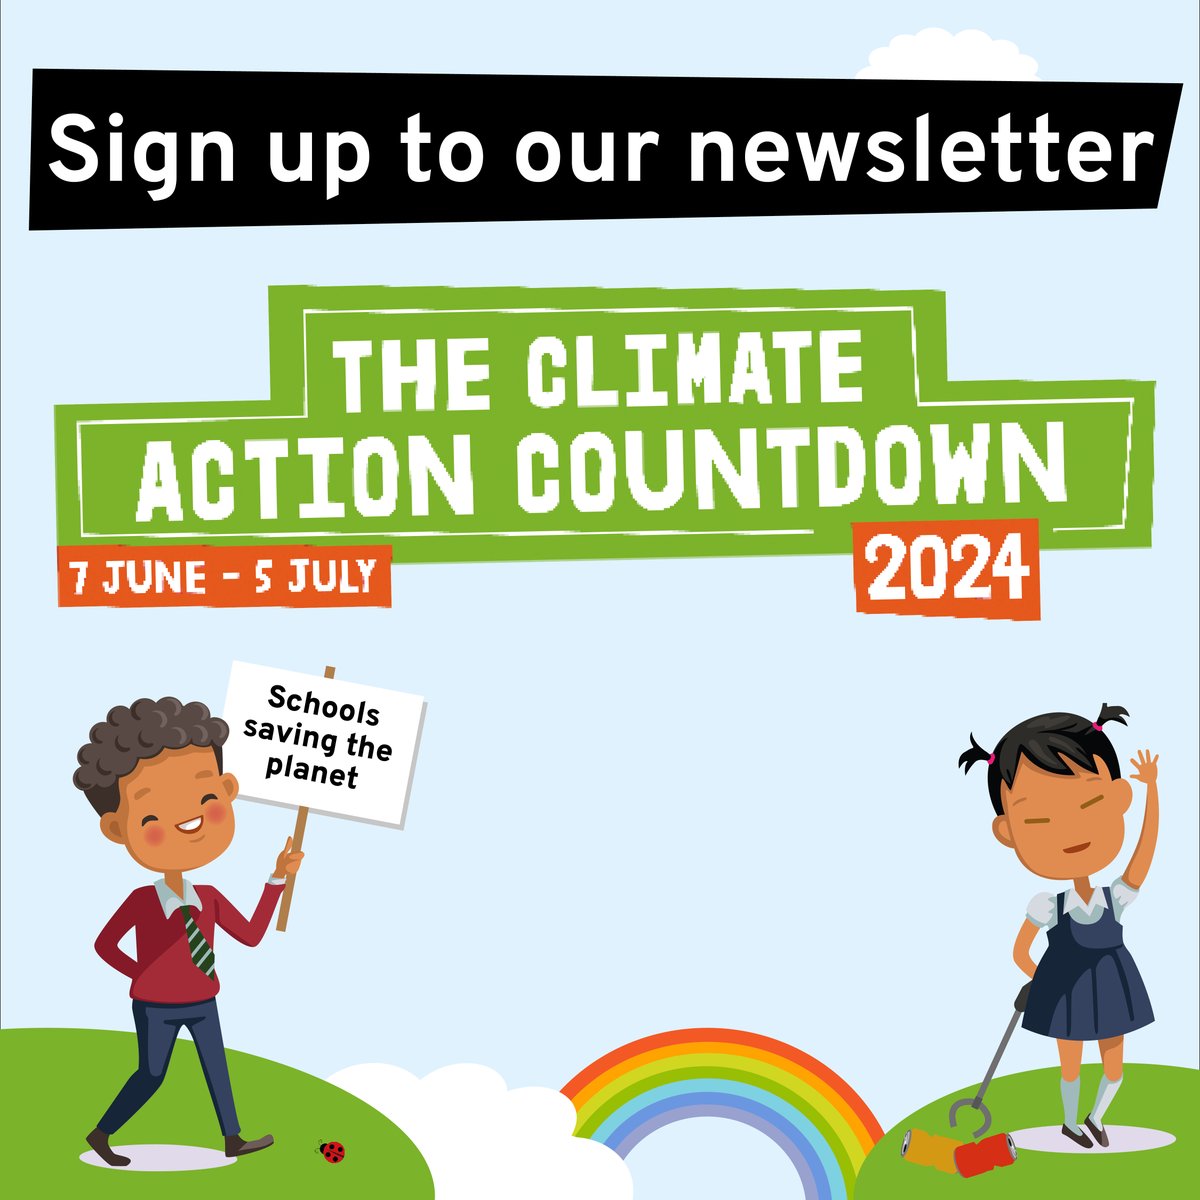 Not long until the #ClimateActionCountdown begins! 🌍 Get ready to embark on a journey of daily sustainability challenges starting June 7th! Sign up for FREE resources, lesson ideas and eco-inspiration. Get involved ➡️ bit.ly/4bMqBtp